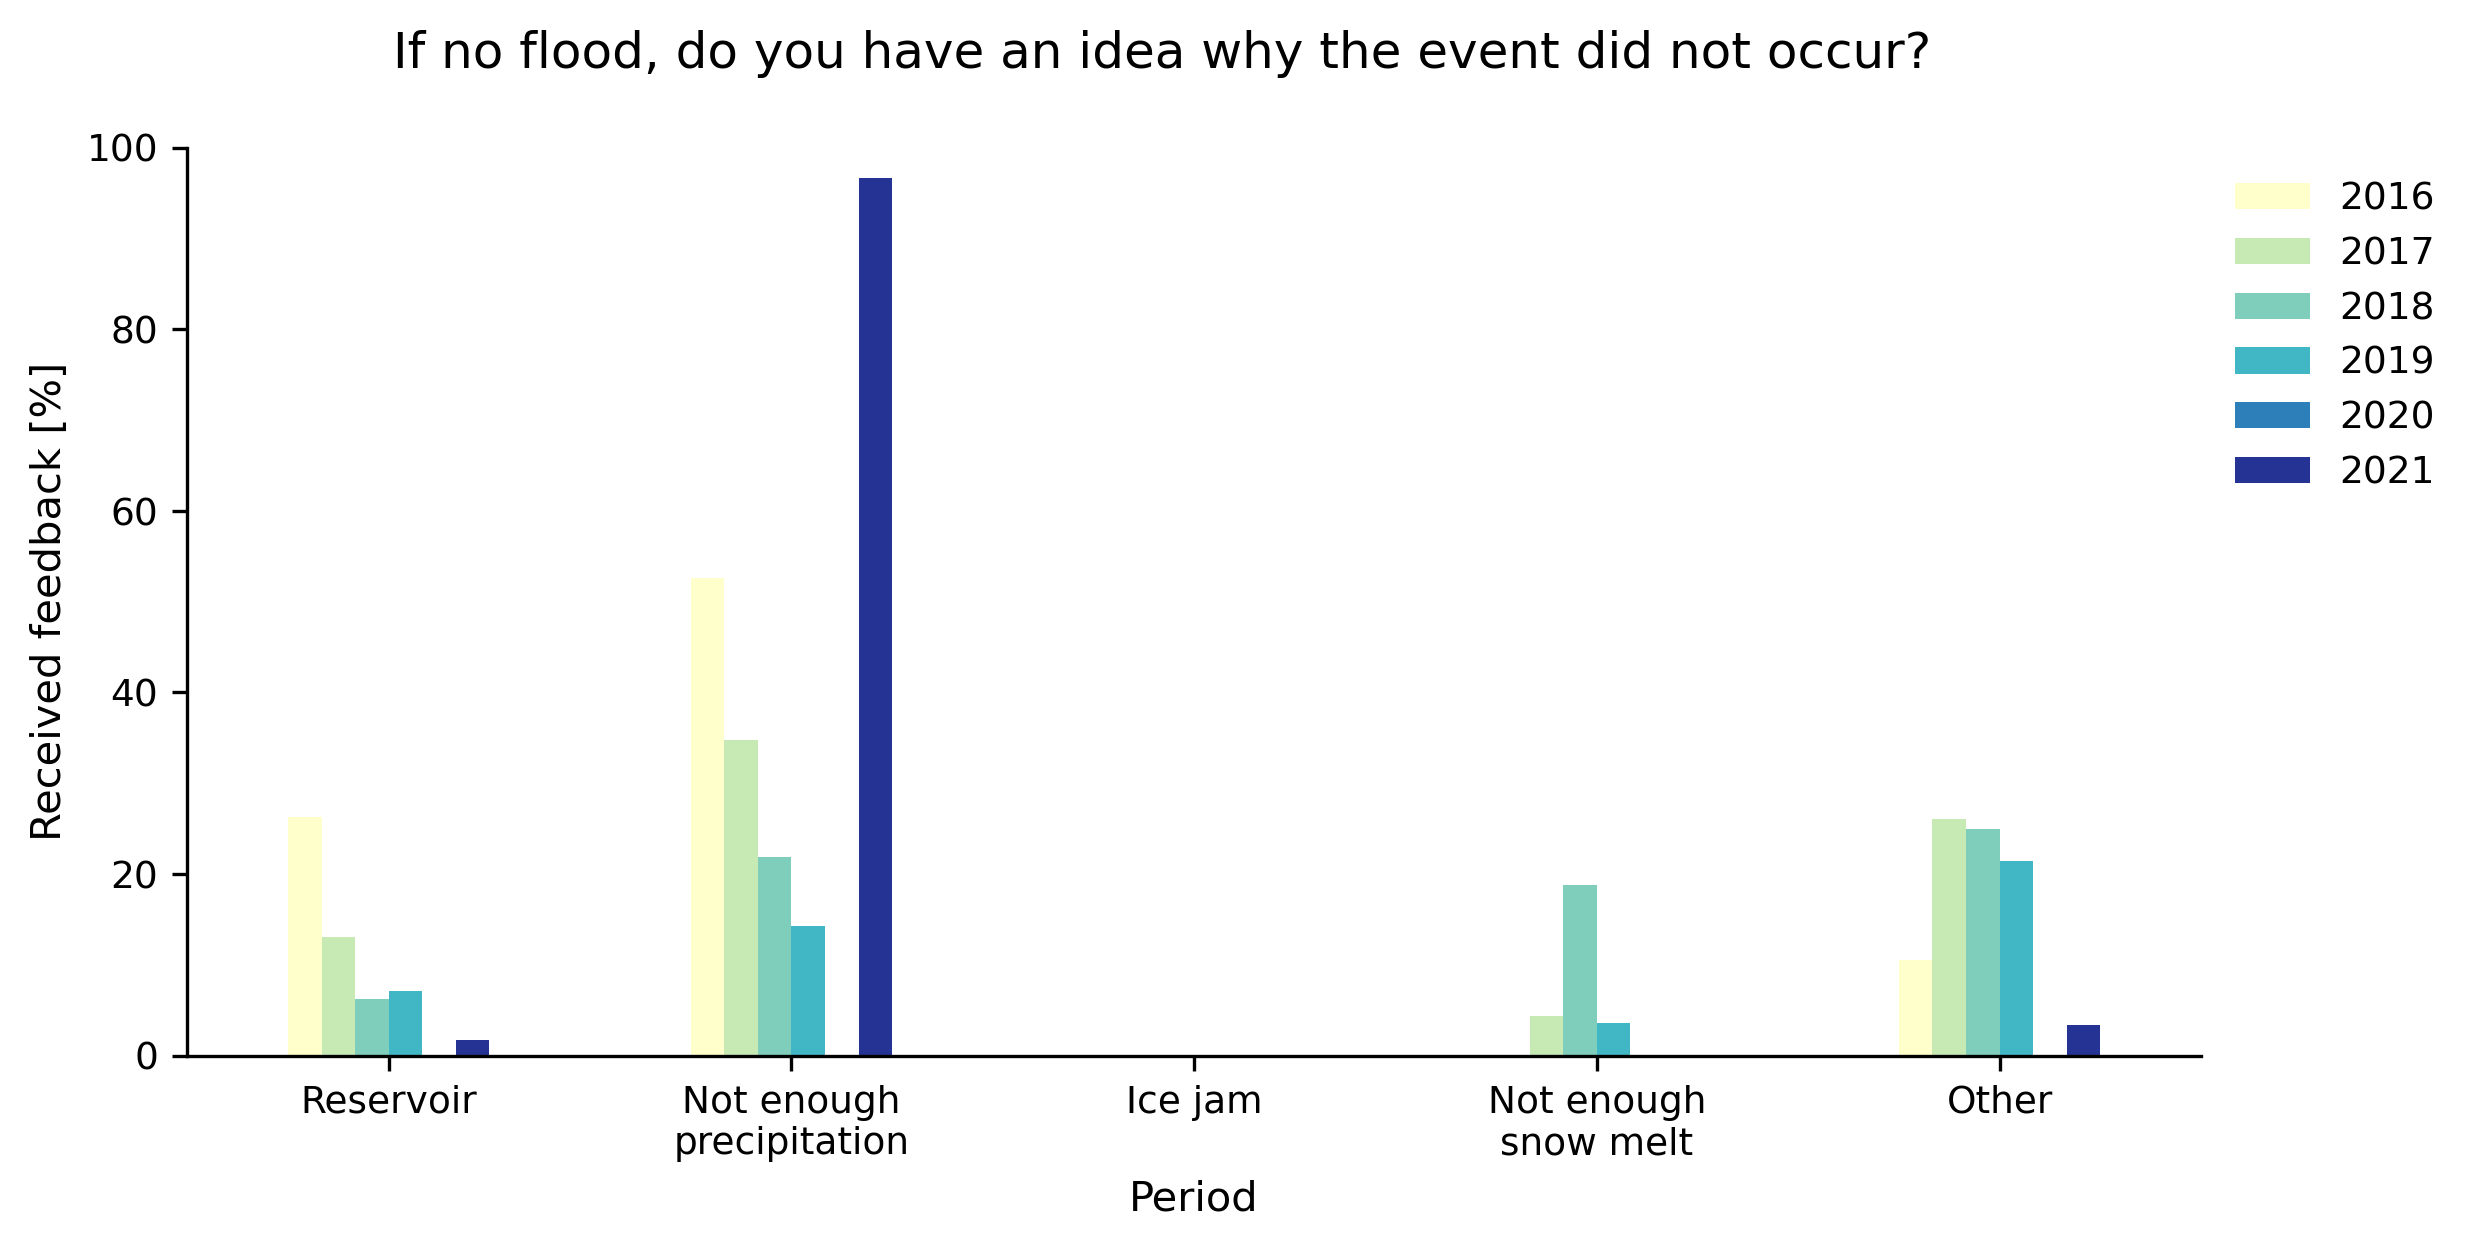 Figure 12. Partners' response to the question "If no flood, do you have an idea why the event did not occur (reservoirs, precipitation as snow, precipitation fell in other area, forecasted precipitation did not occur, snow did not melt as fast as predicted, etc.)?" of the feedback survey.